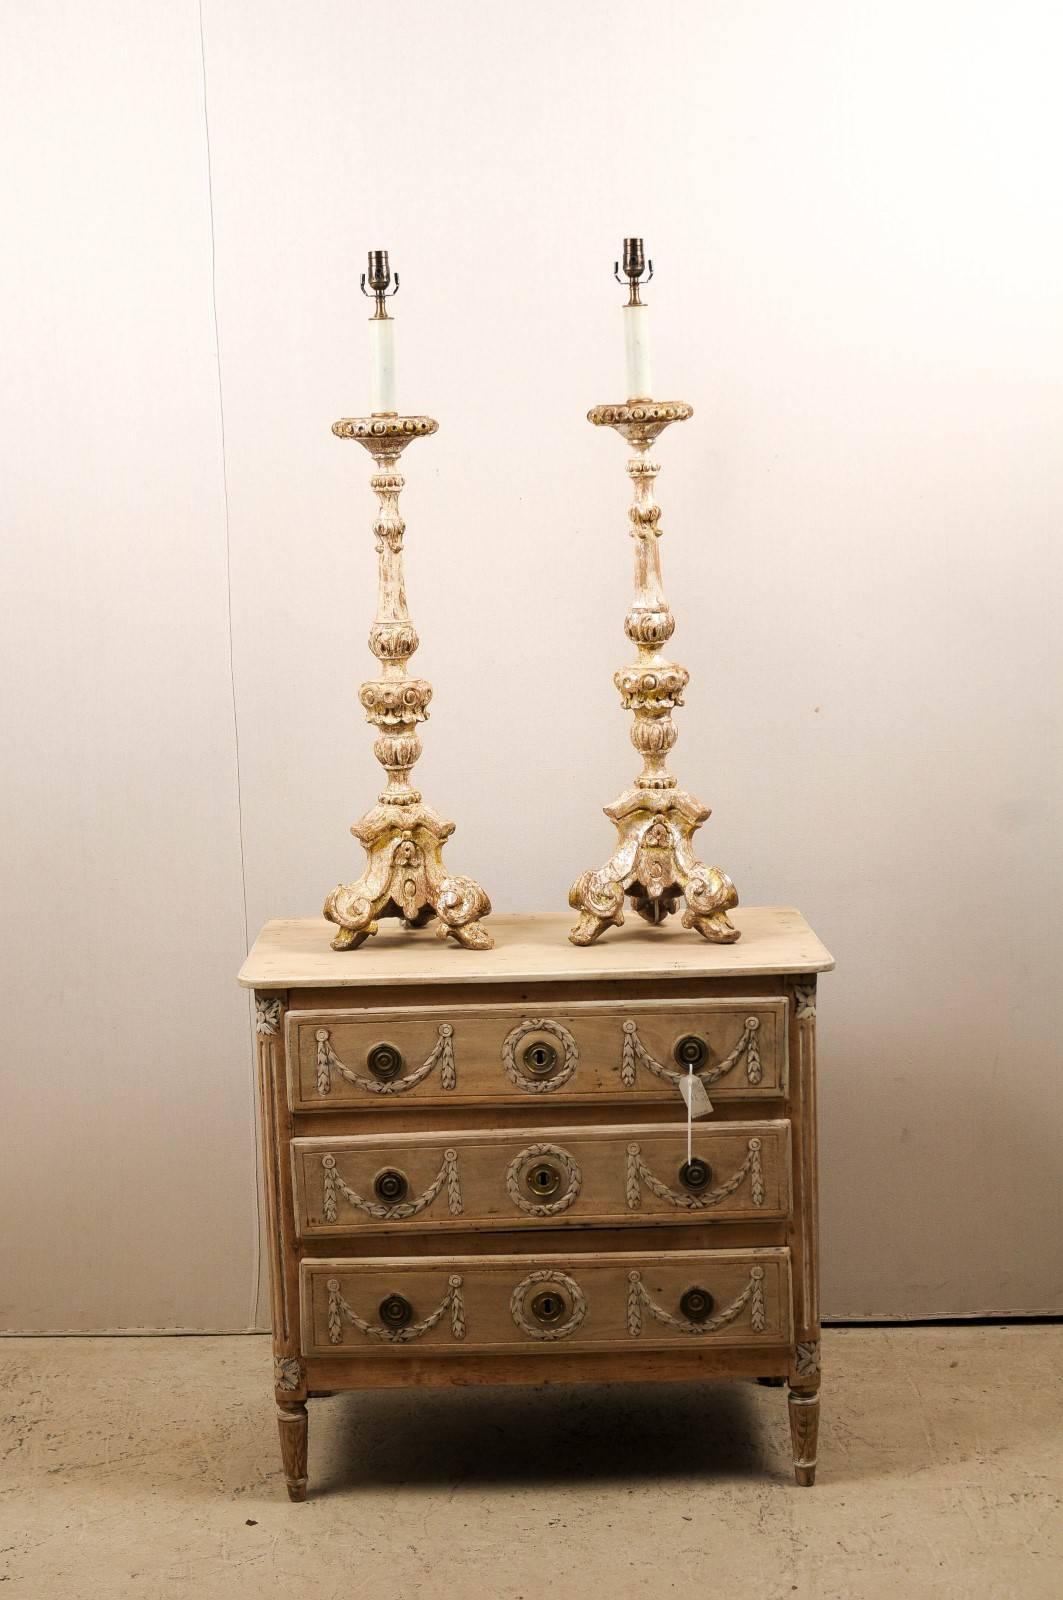 A pair of carved wood altar sticks from the 19th century made into table lamps. This exquisite pair of large size, tall Italian wooden table lamps features a nicely scraped finish with traces of silver gilding and yellow paint. The lamps have a